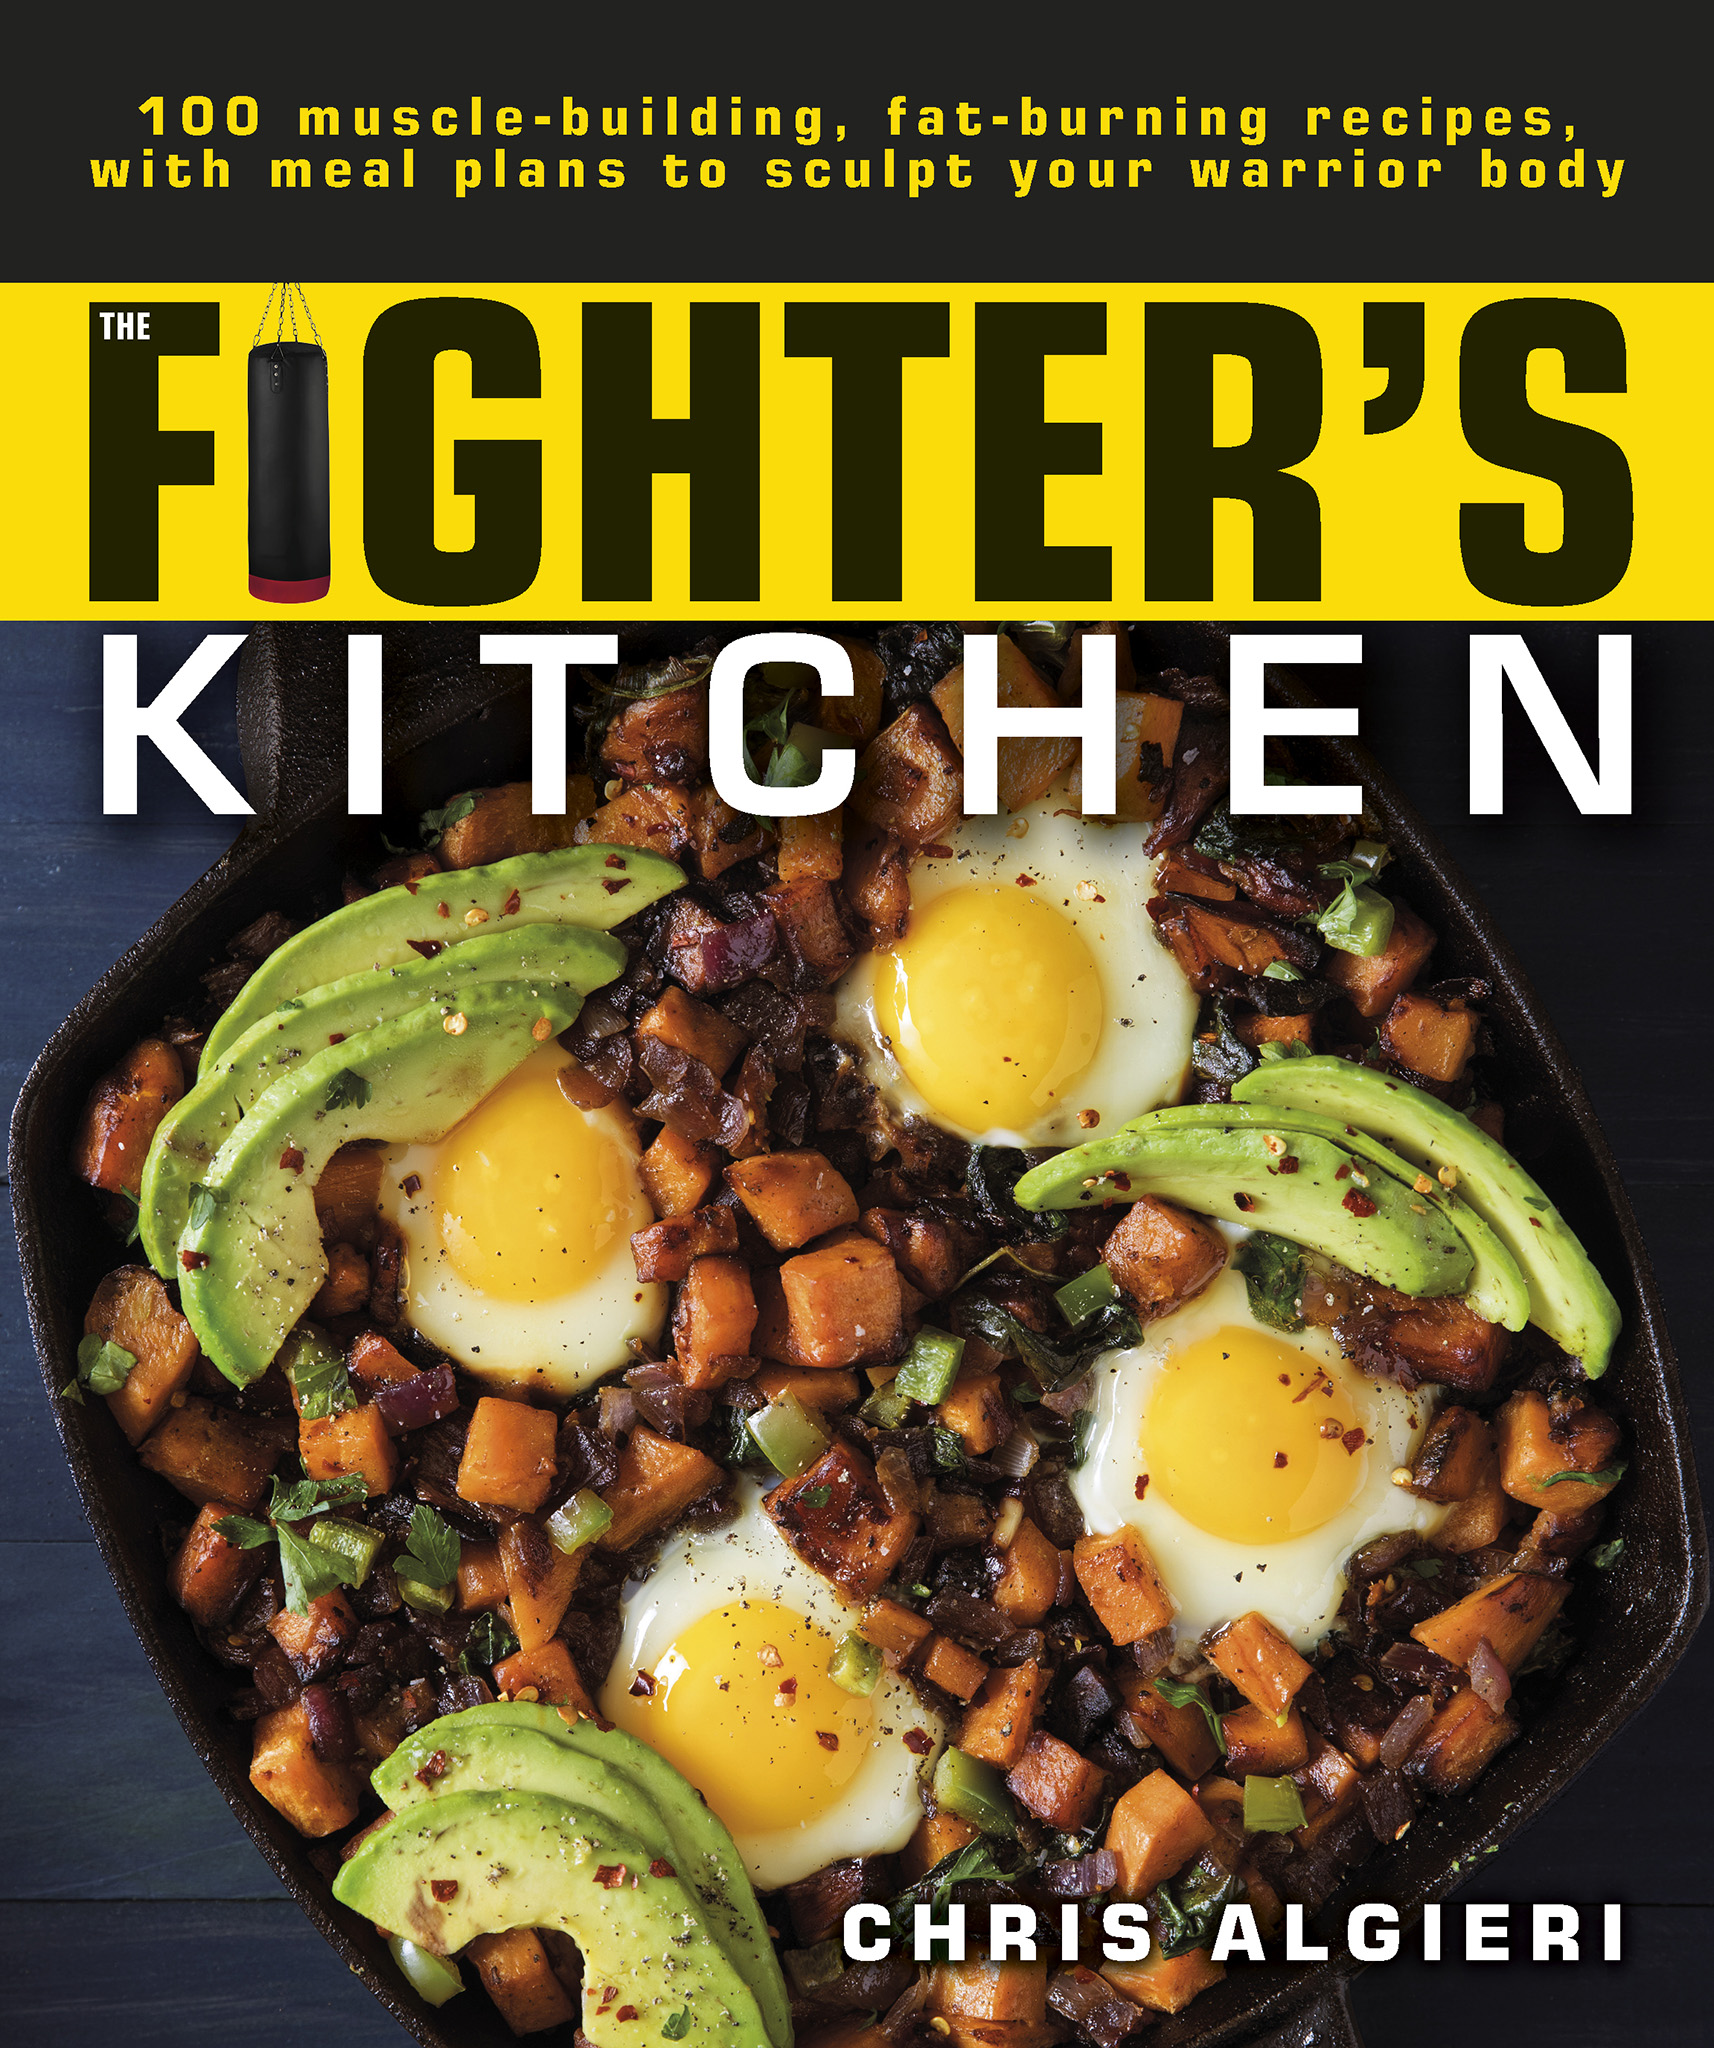 The Fighter’s Kitchen